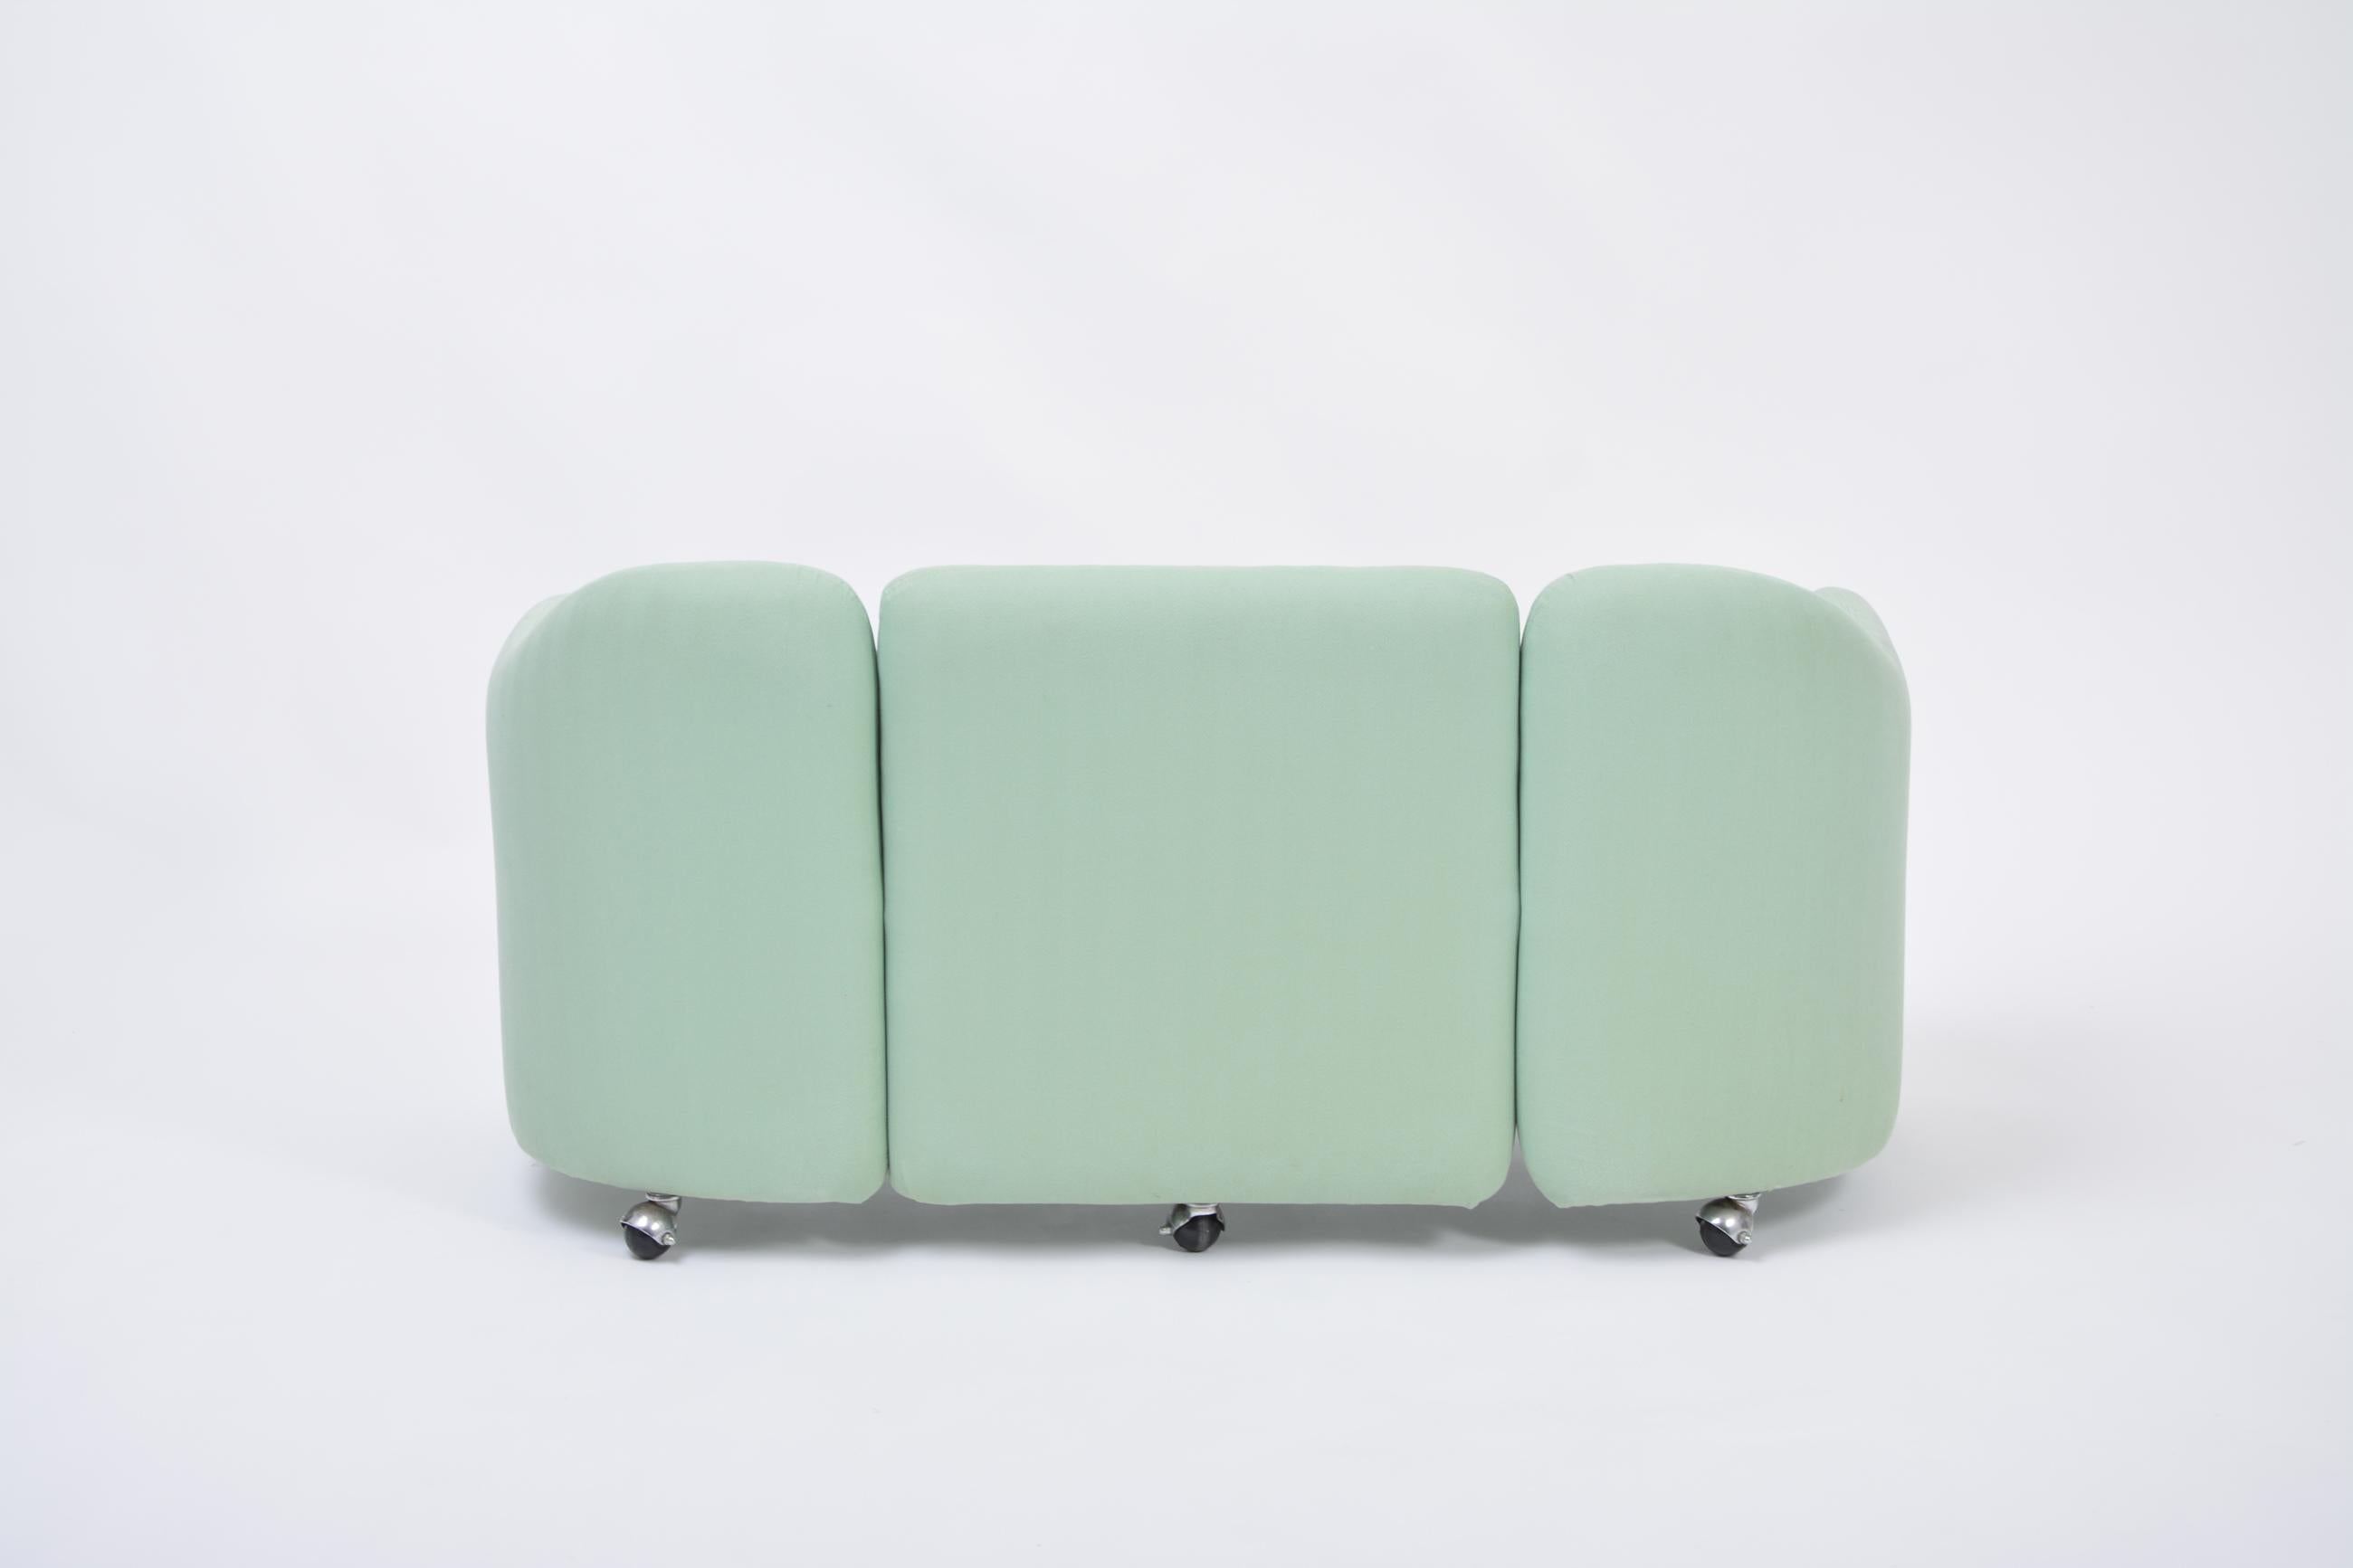 Italian Mid-Century Modern Two-Seater Sofa by Eugenio Gerli for Tecno, 1966 For Sale 2